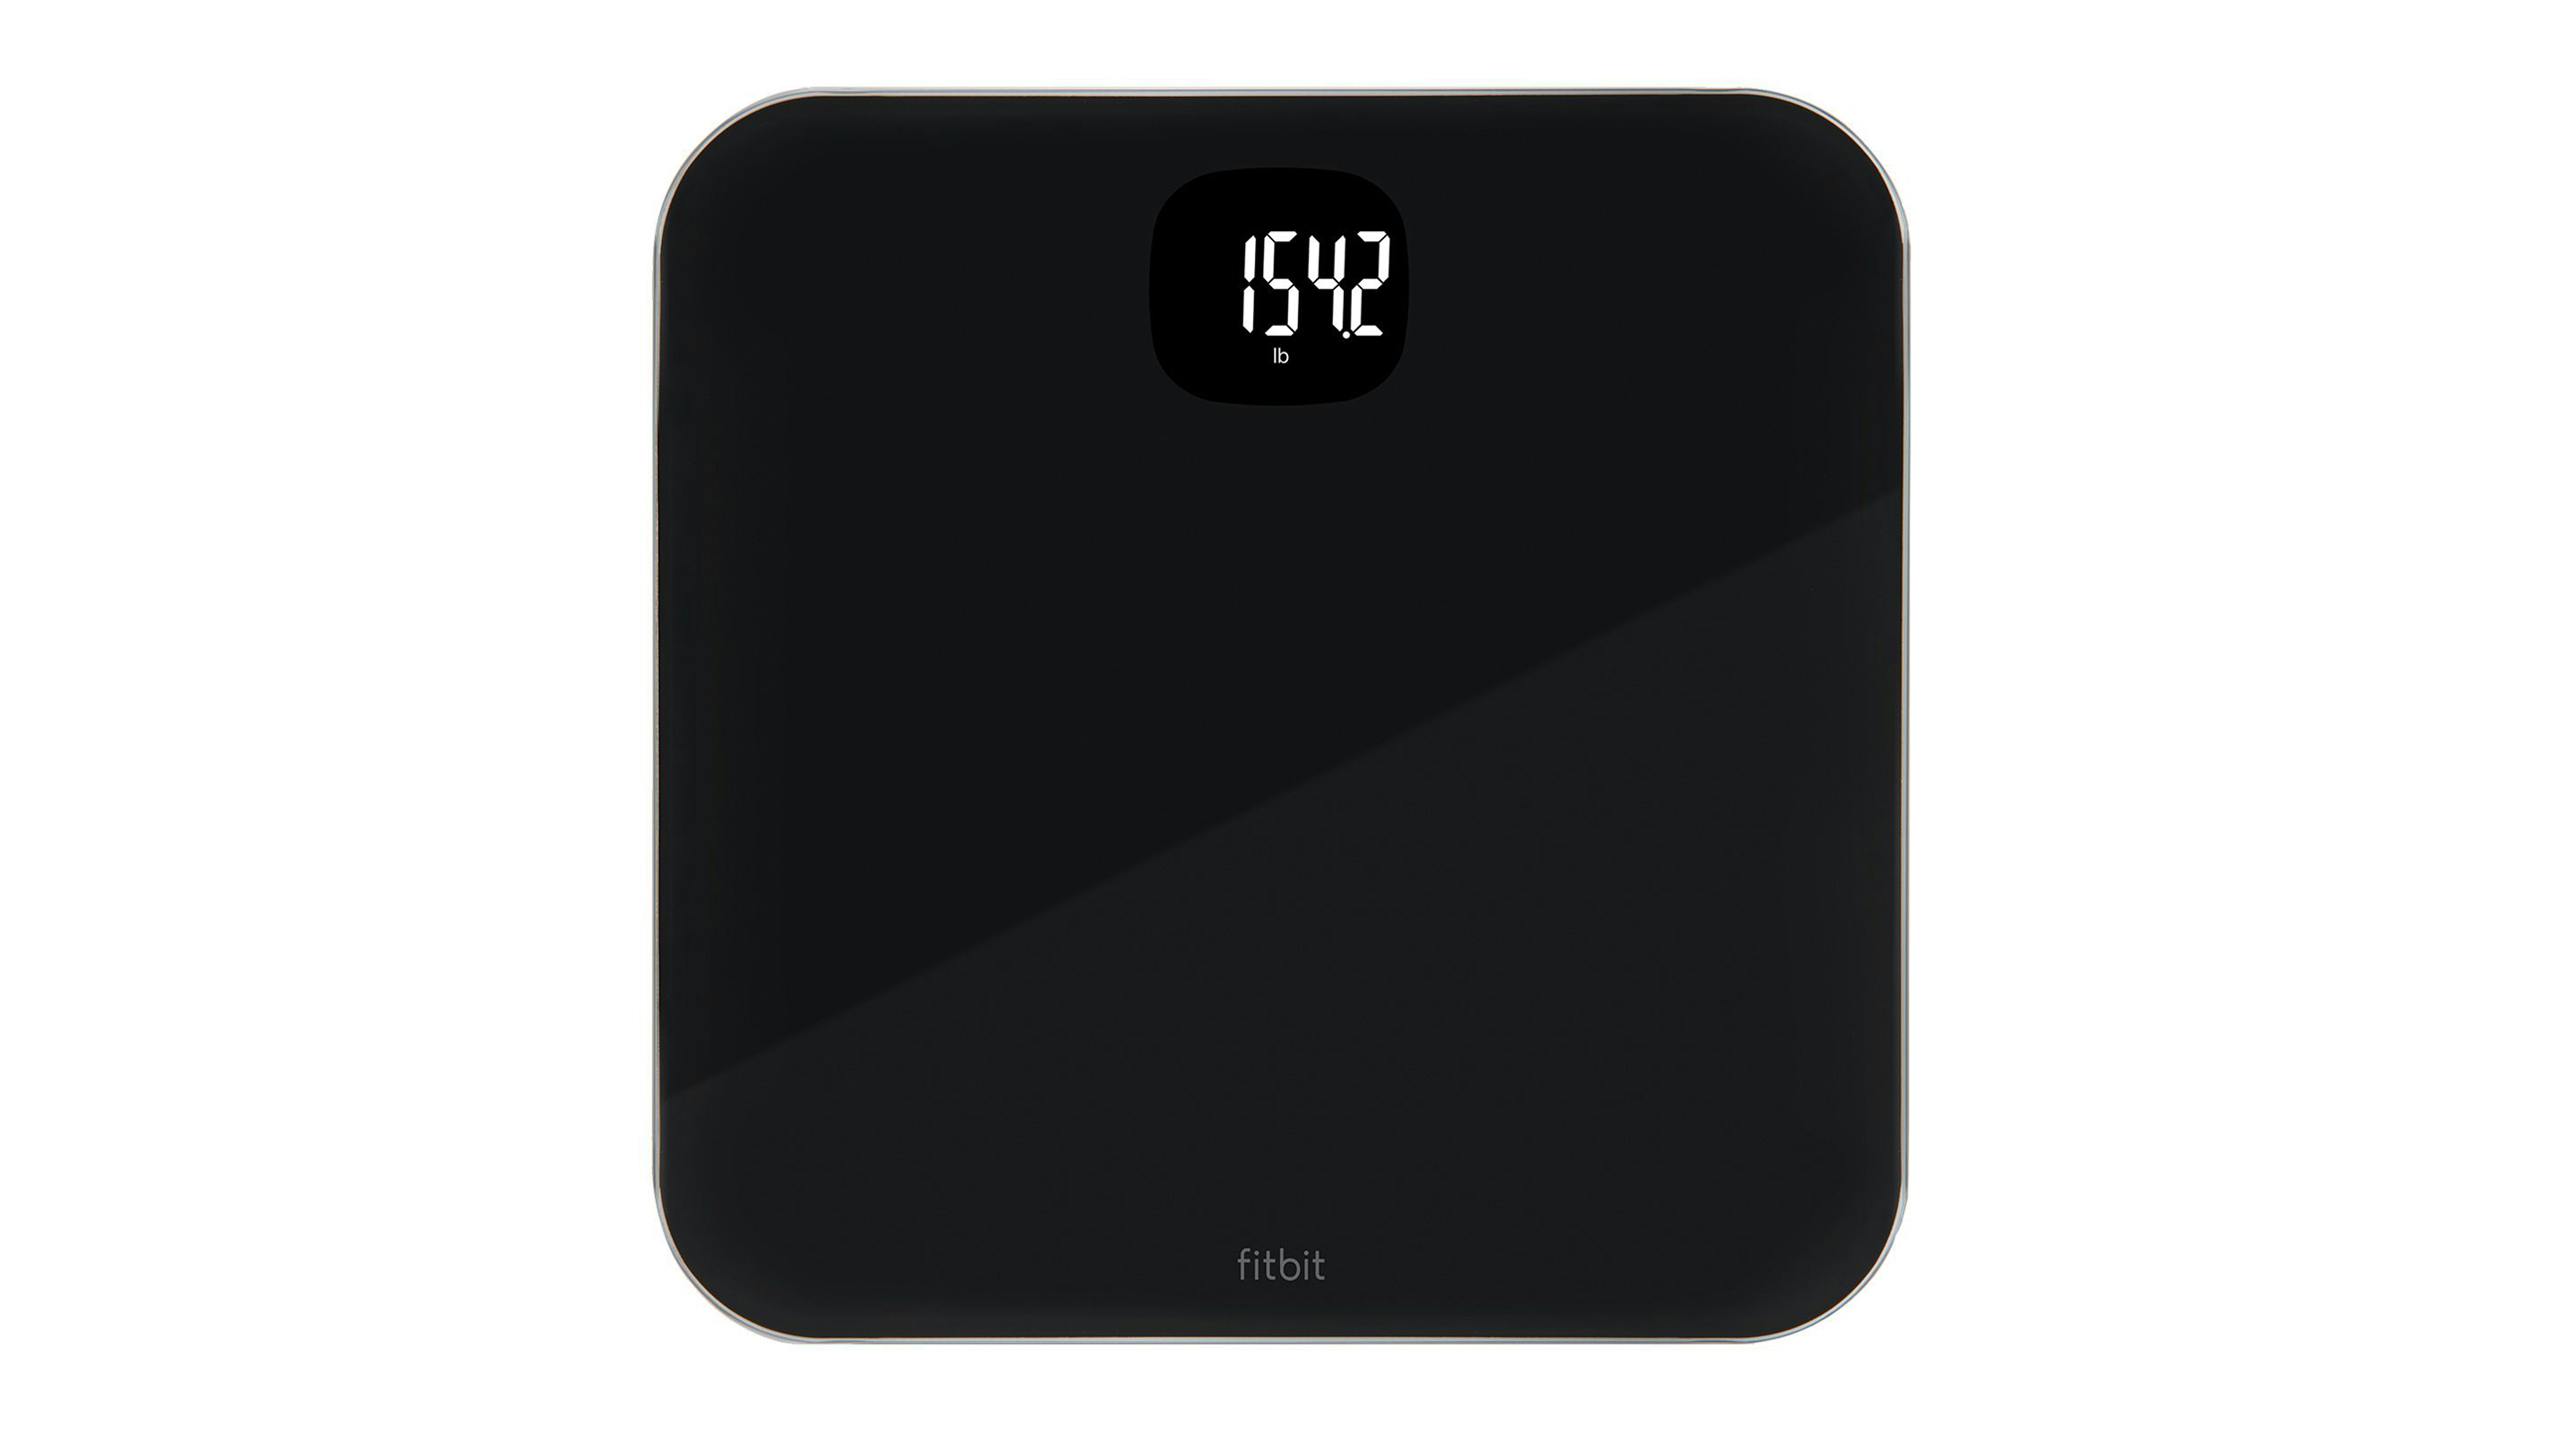 Fitbit Aria Air Smart Scale - Black | Harvey Norman New Zealand